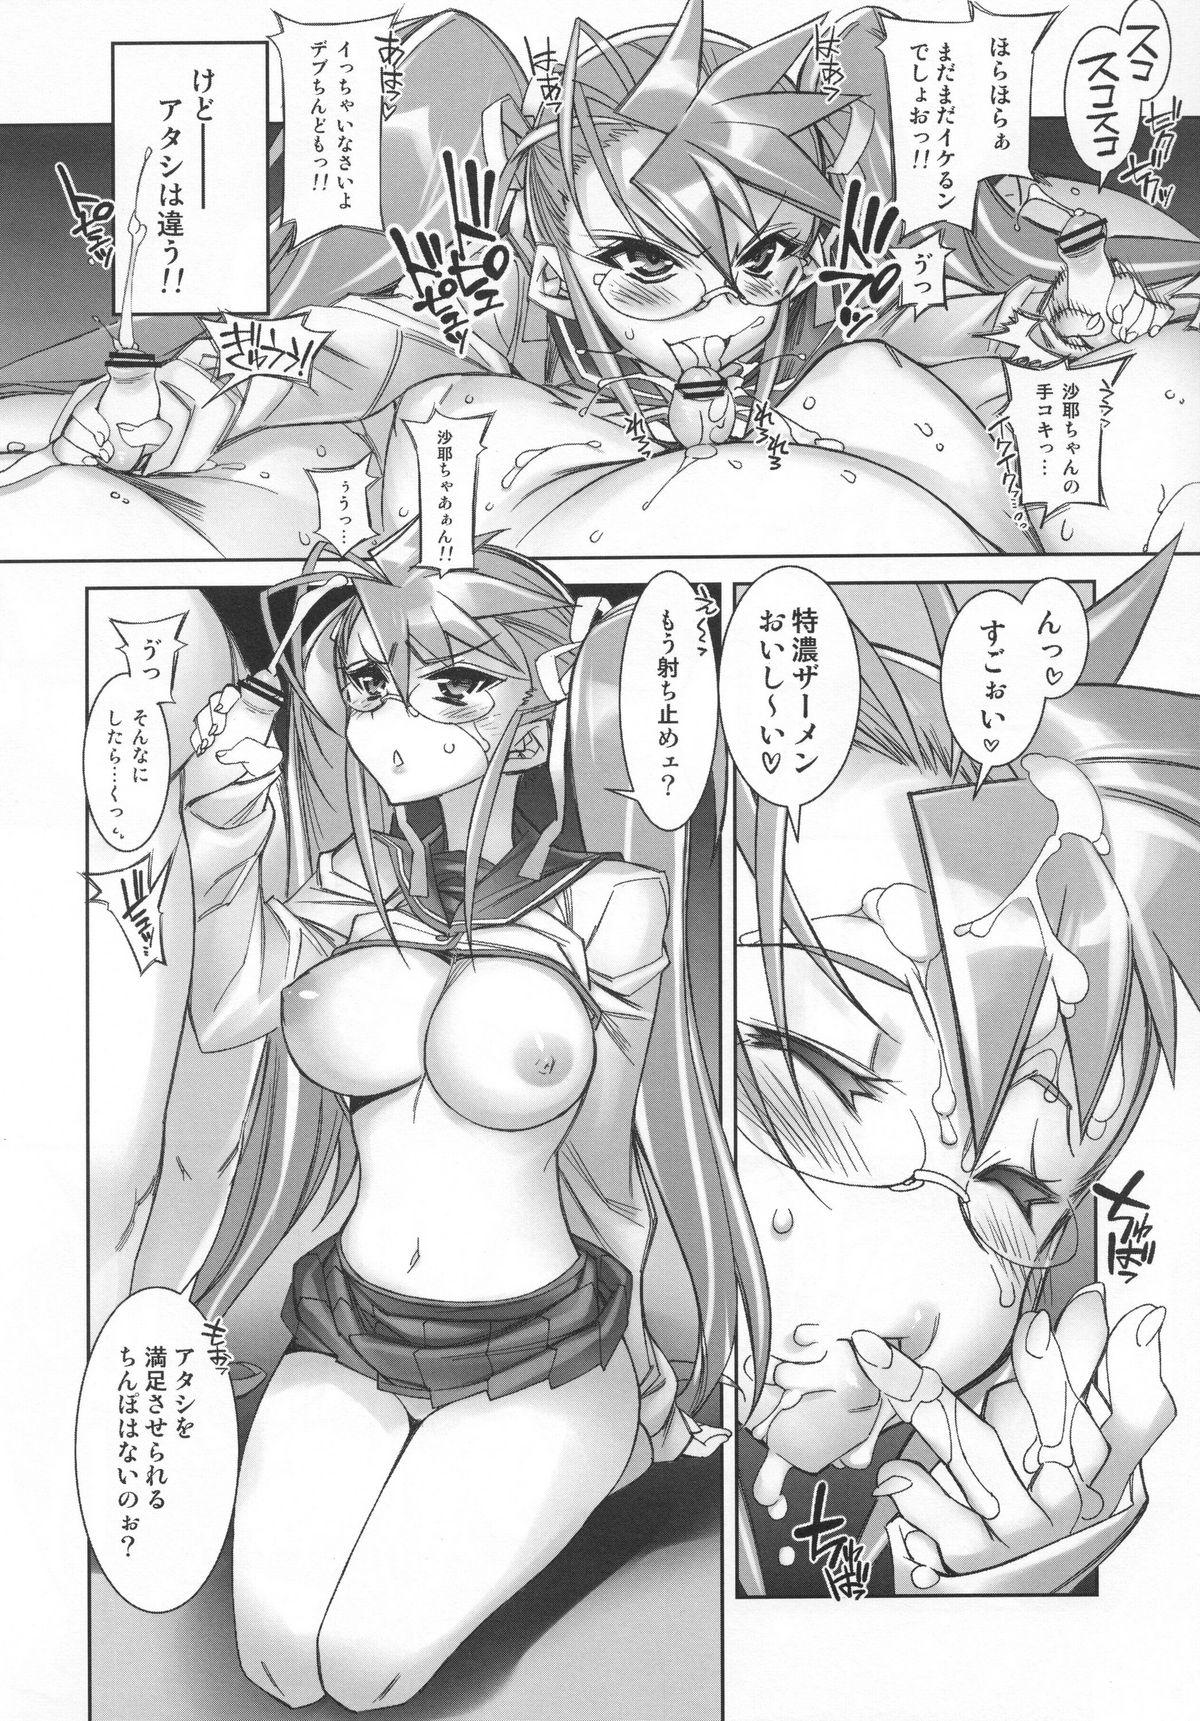 France SWAPPING OF THE DEAD 2/3 - Highschool of the dead Actress - Page 7